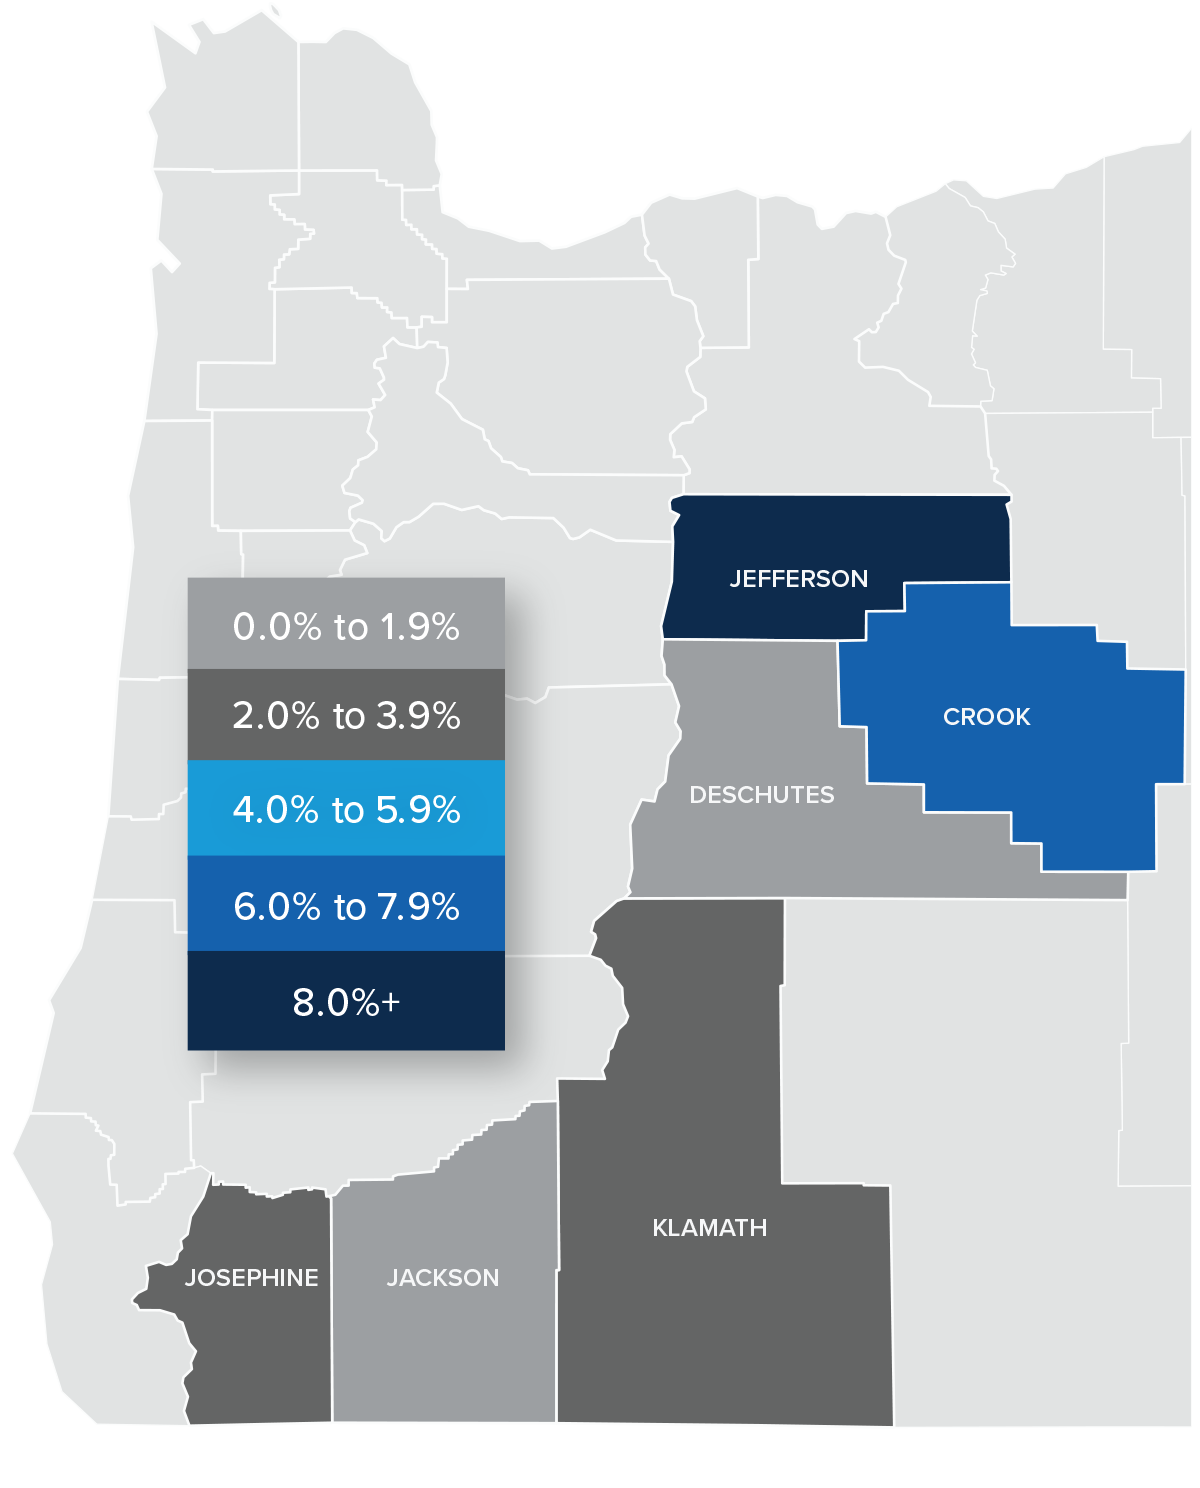 A map showing the real estate home prices percentage changes for various counties in Central and Southern Oregon. Different colors correspond to different tiers of percentage change. Deschutes and Jackson Counties have a percentage change in the 0% to 1.9% range, Klamath and Josephine are in the 2% to 3.9% change range, Crook is in the 6% to 7.9% change range, and Jefferson County is in the 8%+ change range.